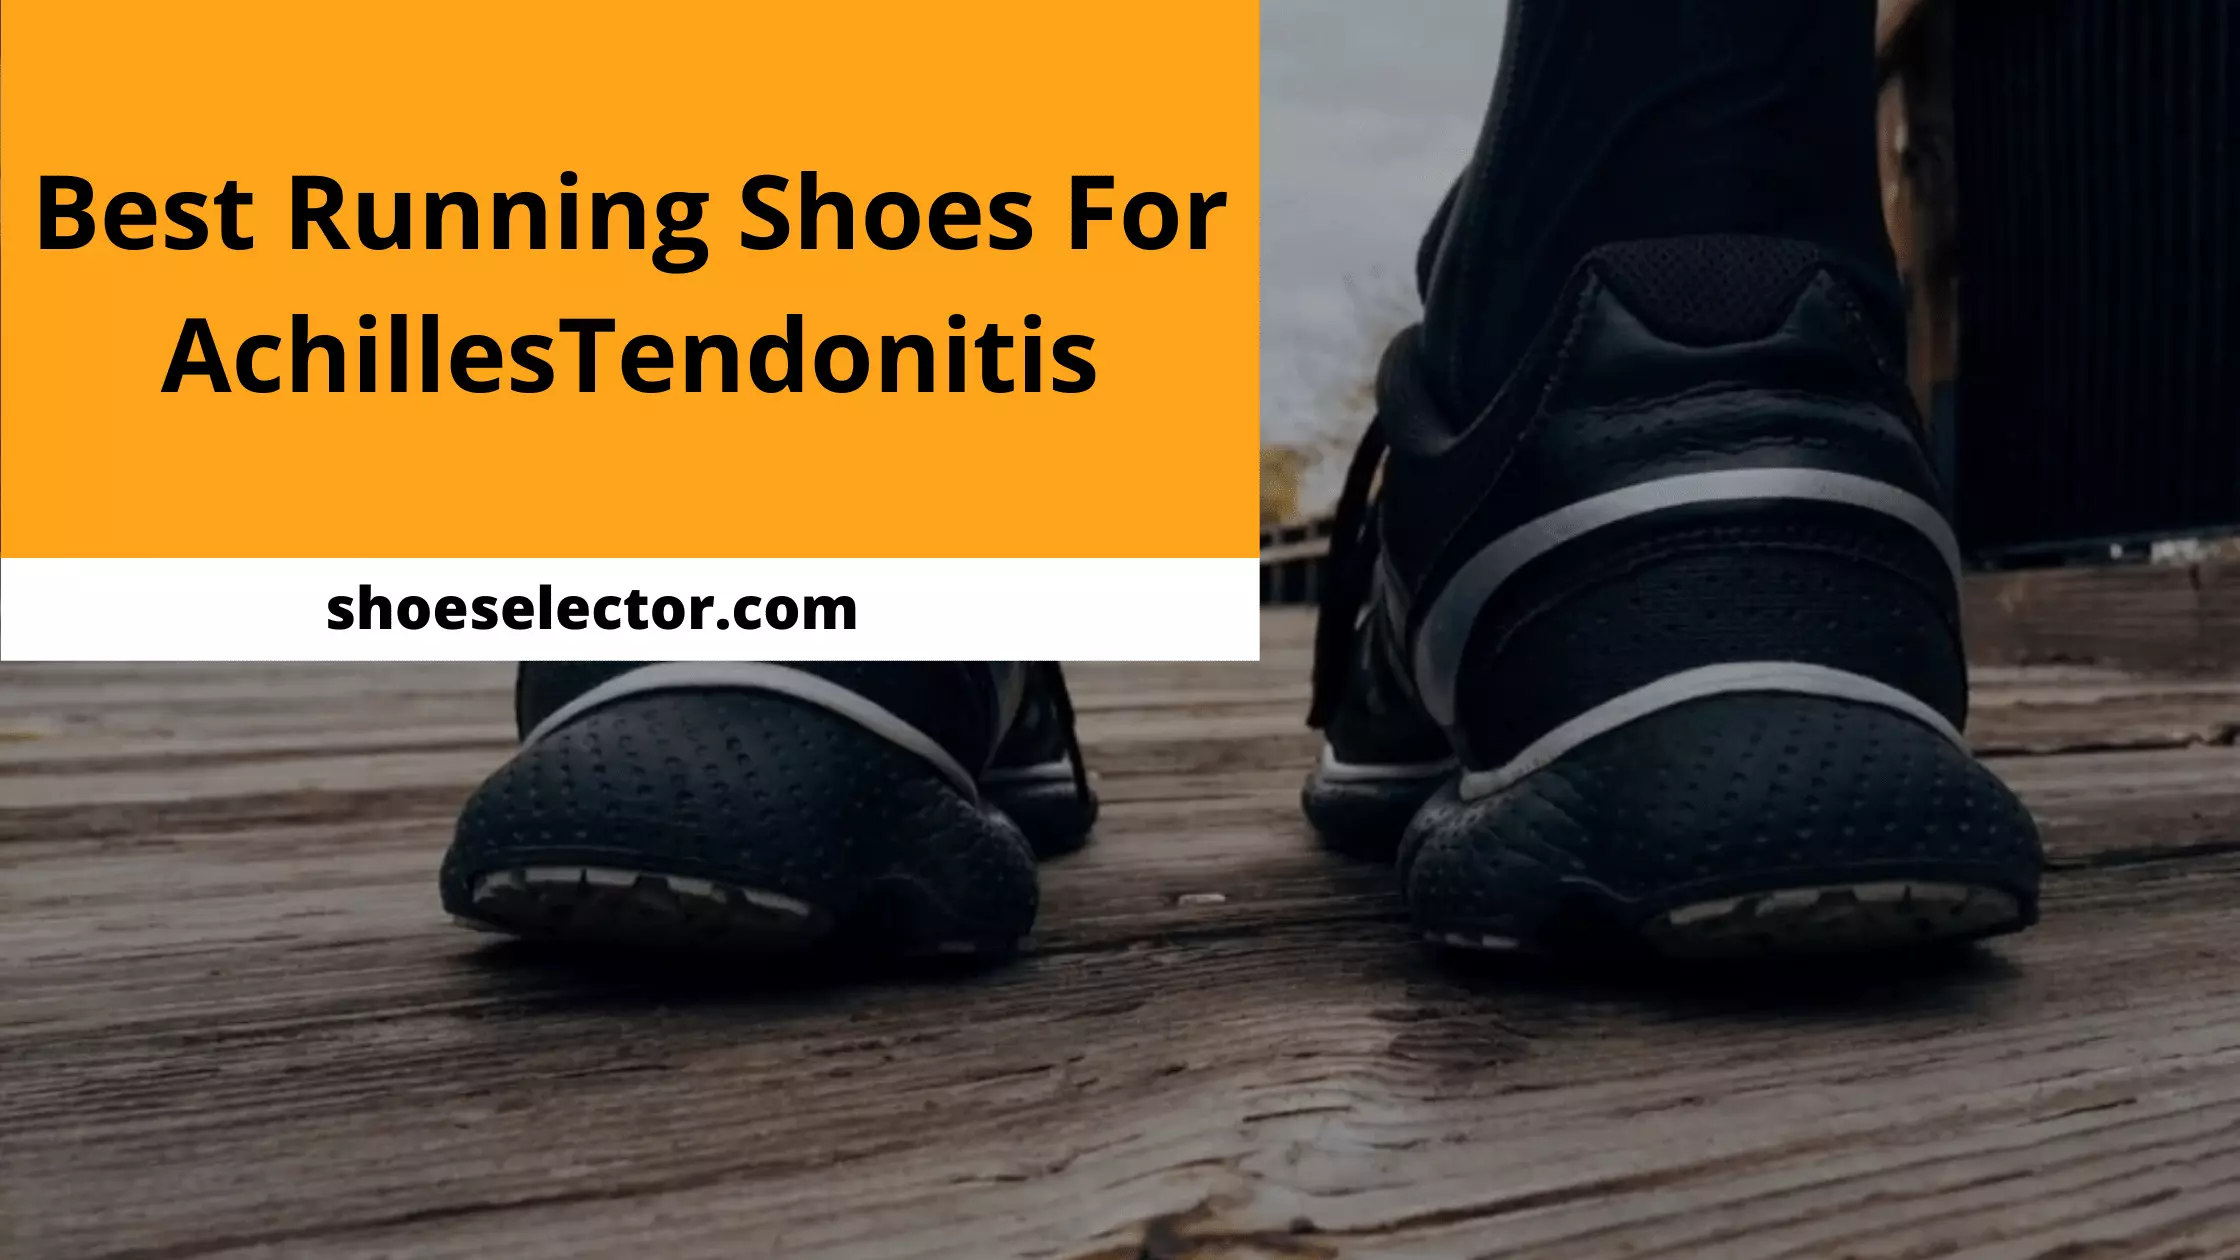 Best Running Shoes For Achilles Tendonitis [REVEALED Top Picks in 2022]